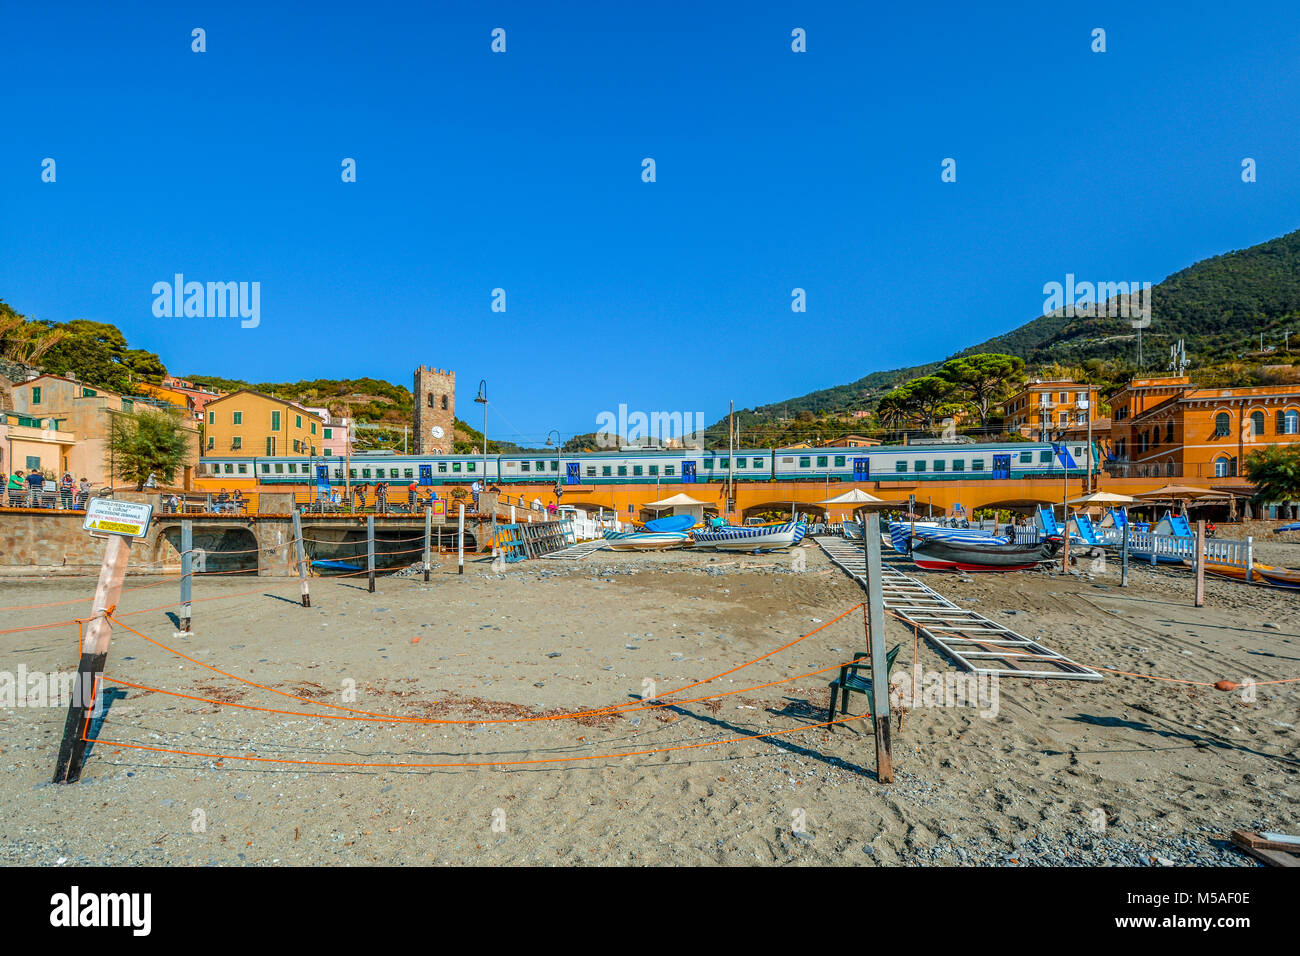 The Trenitalia train travels through the Cinque Terre village of Monterosso Al Mare with the town including church clock tower and the sandy beach Stock Photo